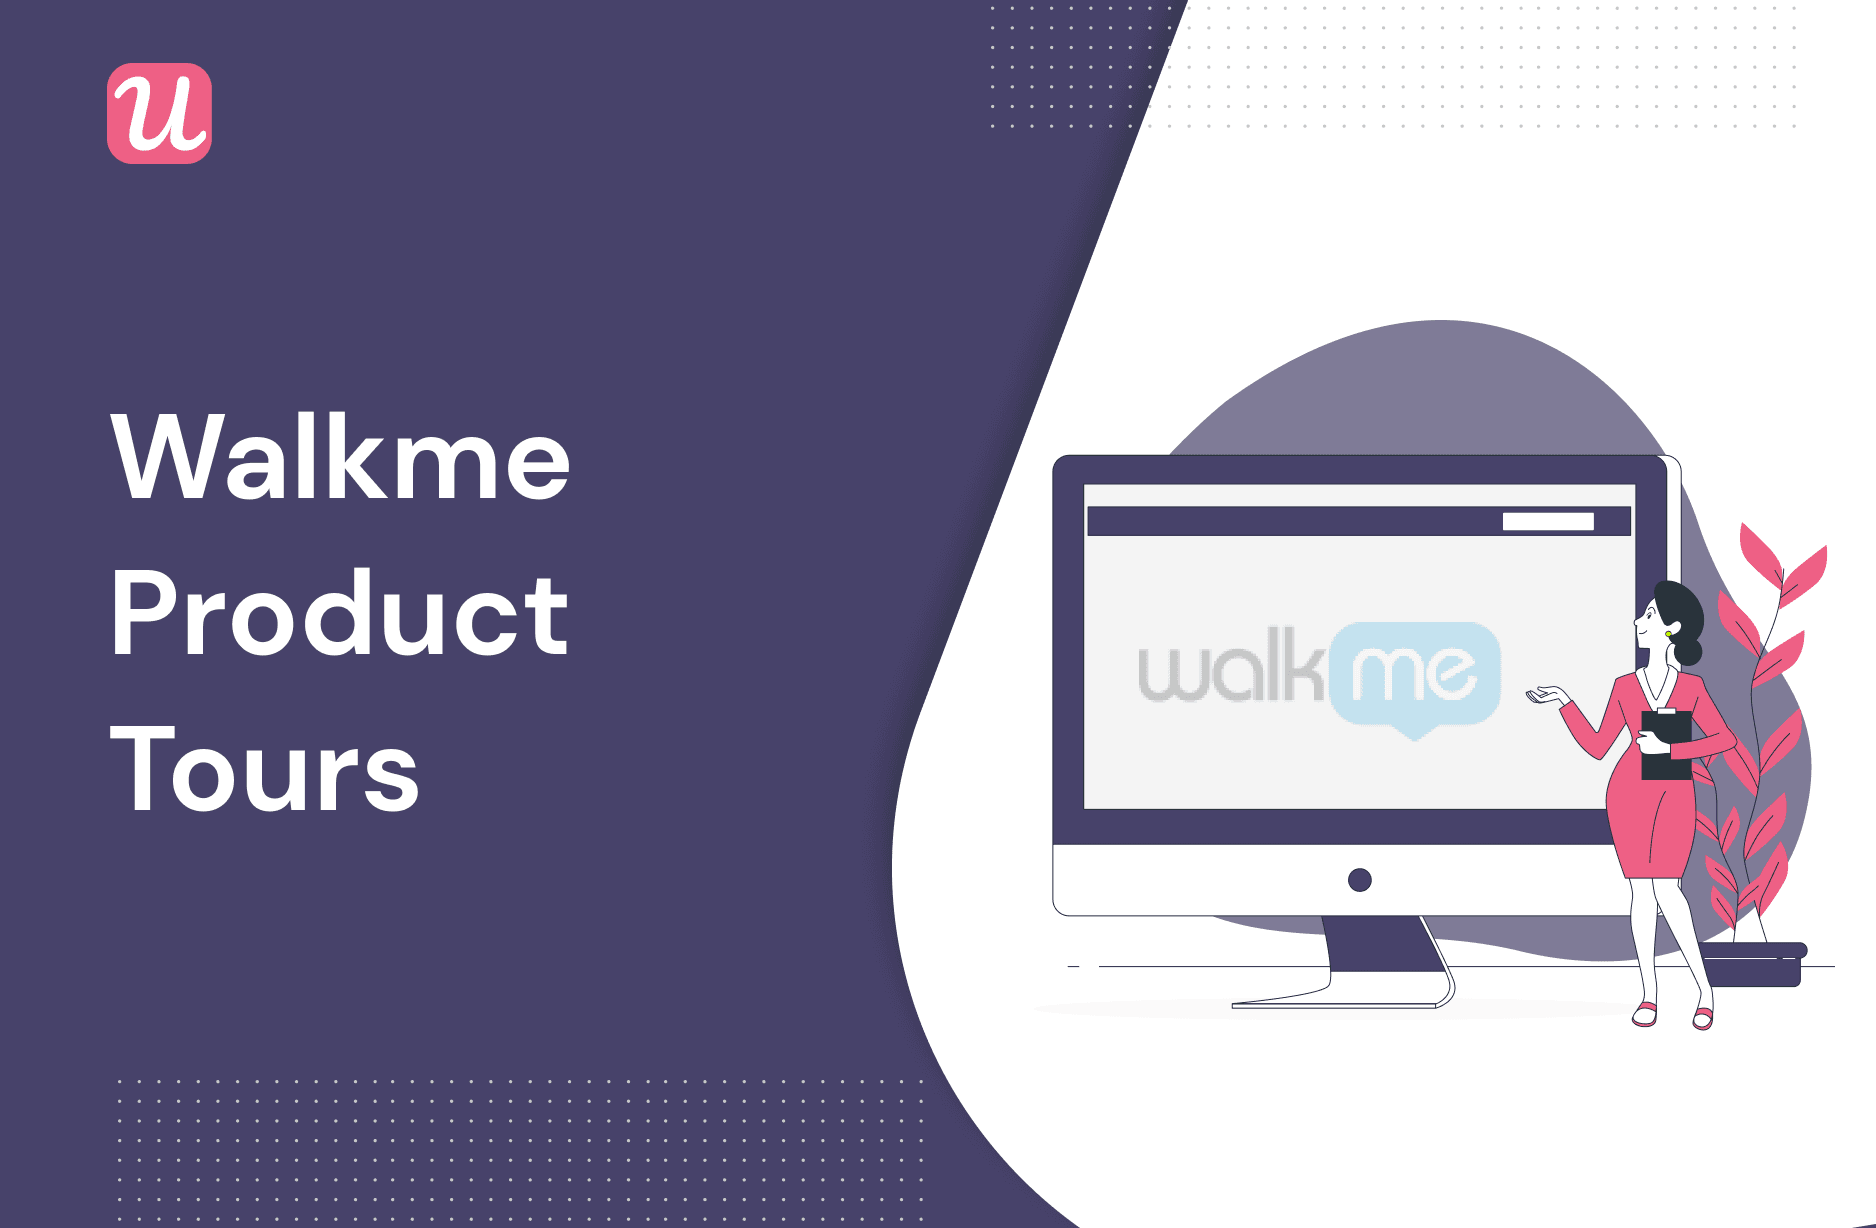 Walkme Product Tours - All You Need to Know + Alternatives